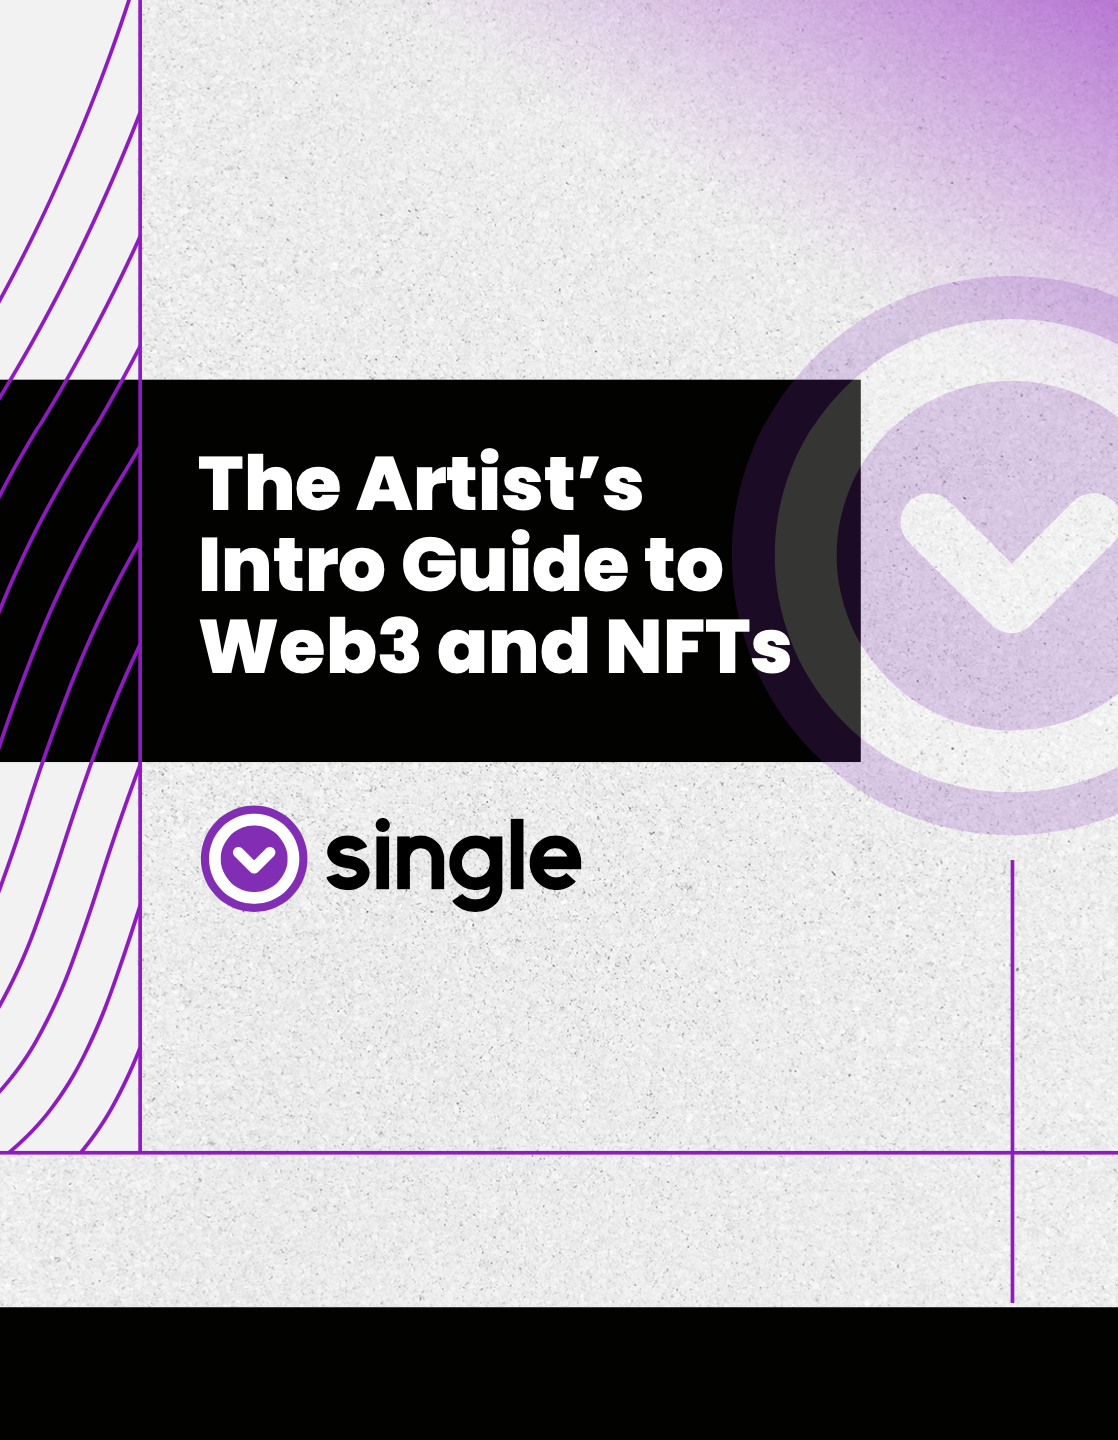 Guide_The Artist’s Intro Guide to Web3 and NFTs_Cover